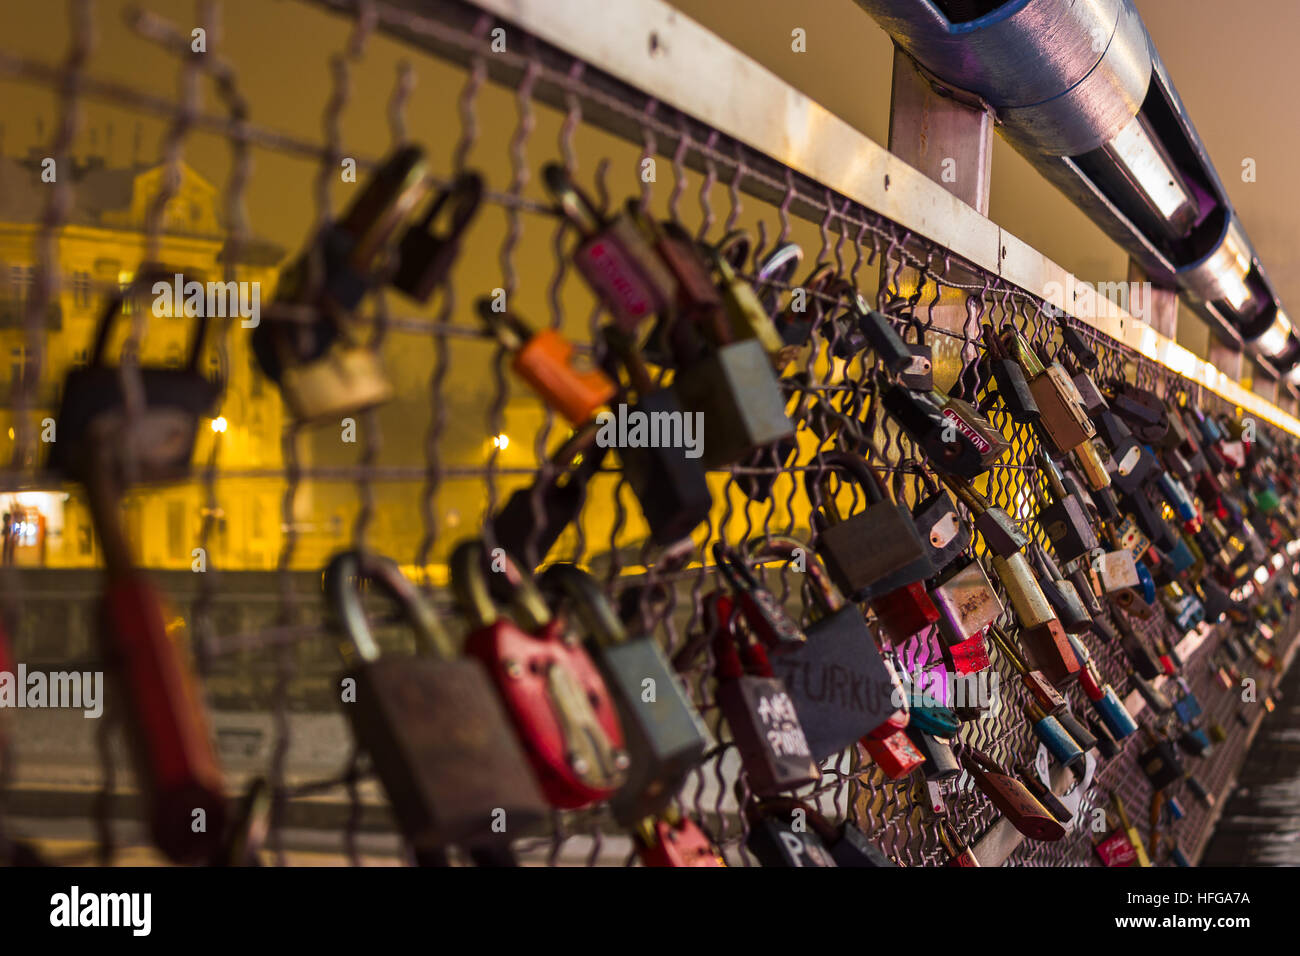 Just some of the padlocks which had been inscribed & locked onto the new bridge over the Vistula river - to symbolise love & relationships. Stock Photo